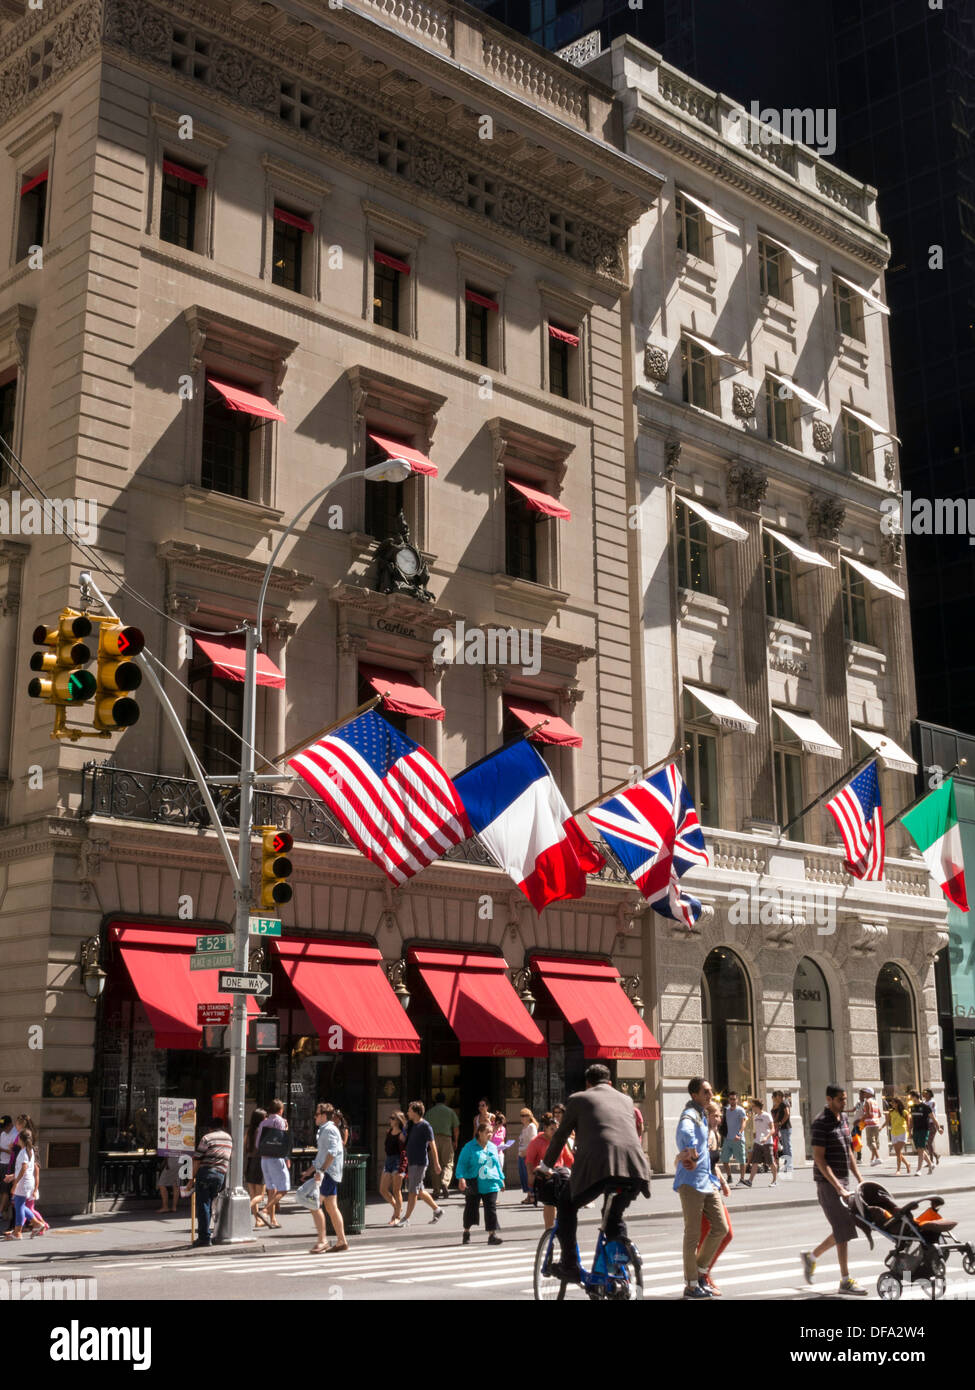 Cartier store front hi-res stock photography and images - Alamy